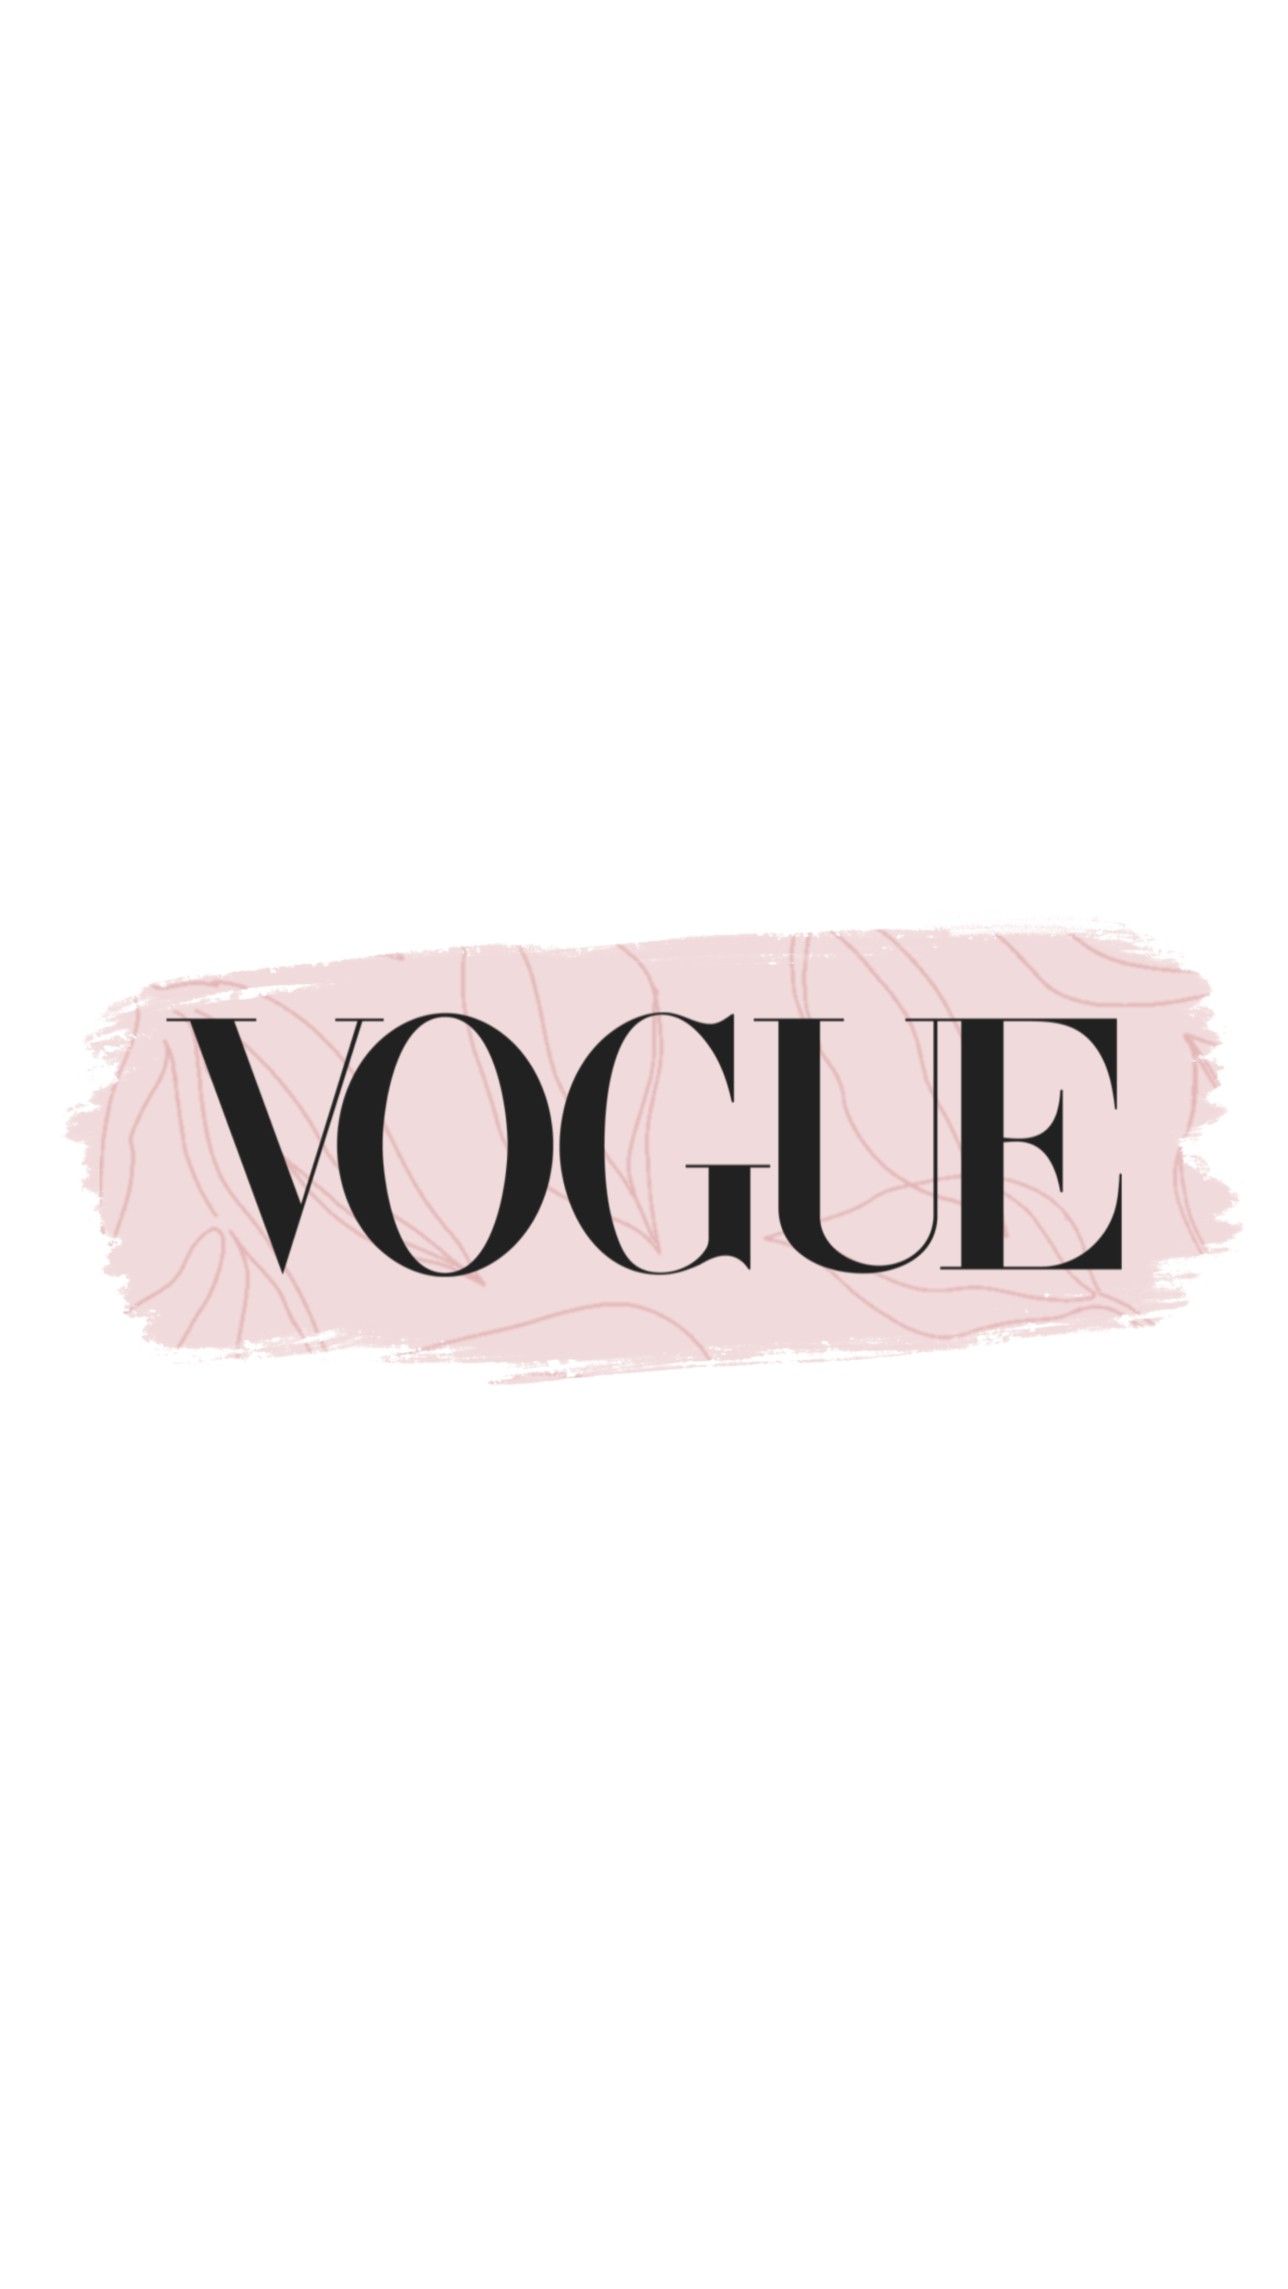 A pink logo with the word vogue on it - Vogue